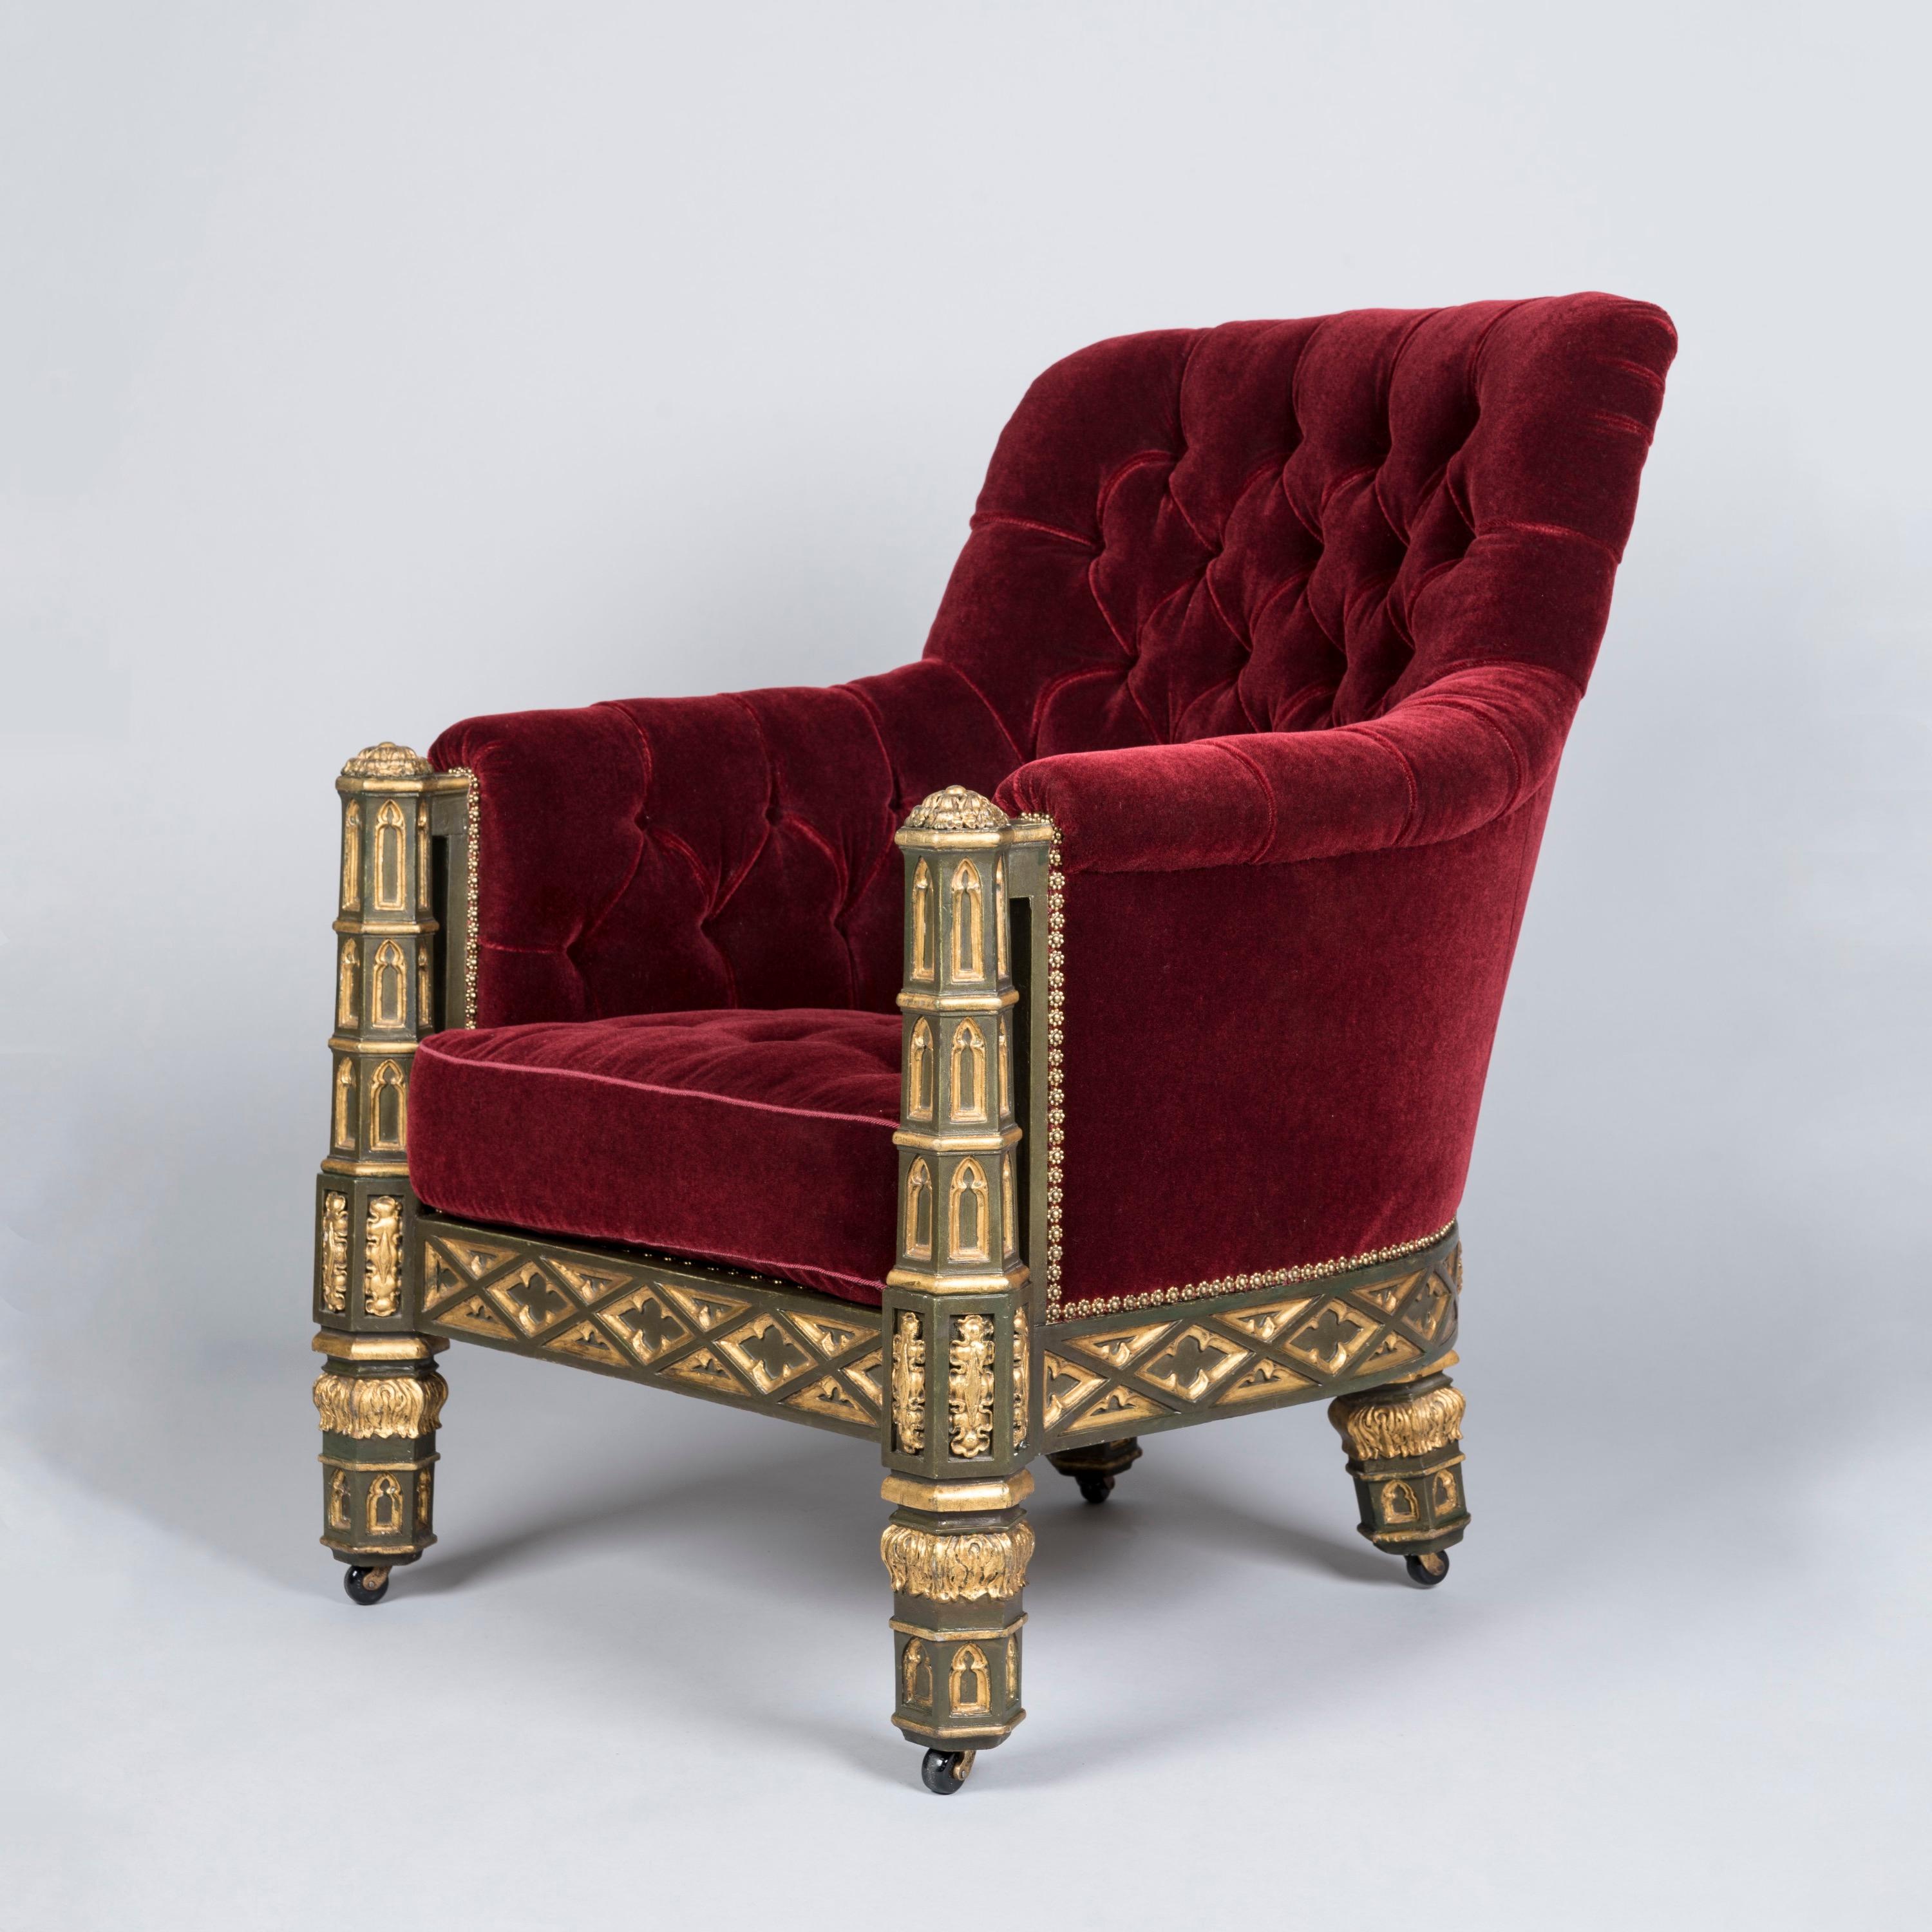 A Splendid Gothic Revival Armchair 
Of the Regency Period

By Gillows of Lancaster

Designed by William Porden 
For Eaton Hall, Cheshire

The finish parcel gilded and painted throughout, the chair stands on four legs, each wrapped with carved